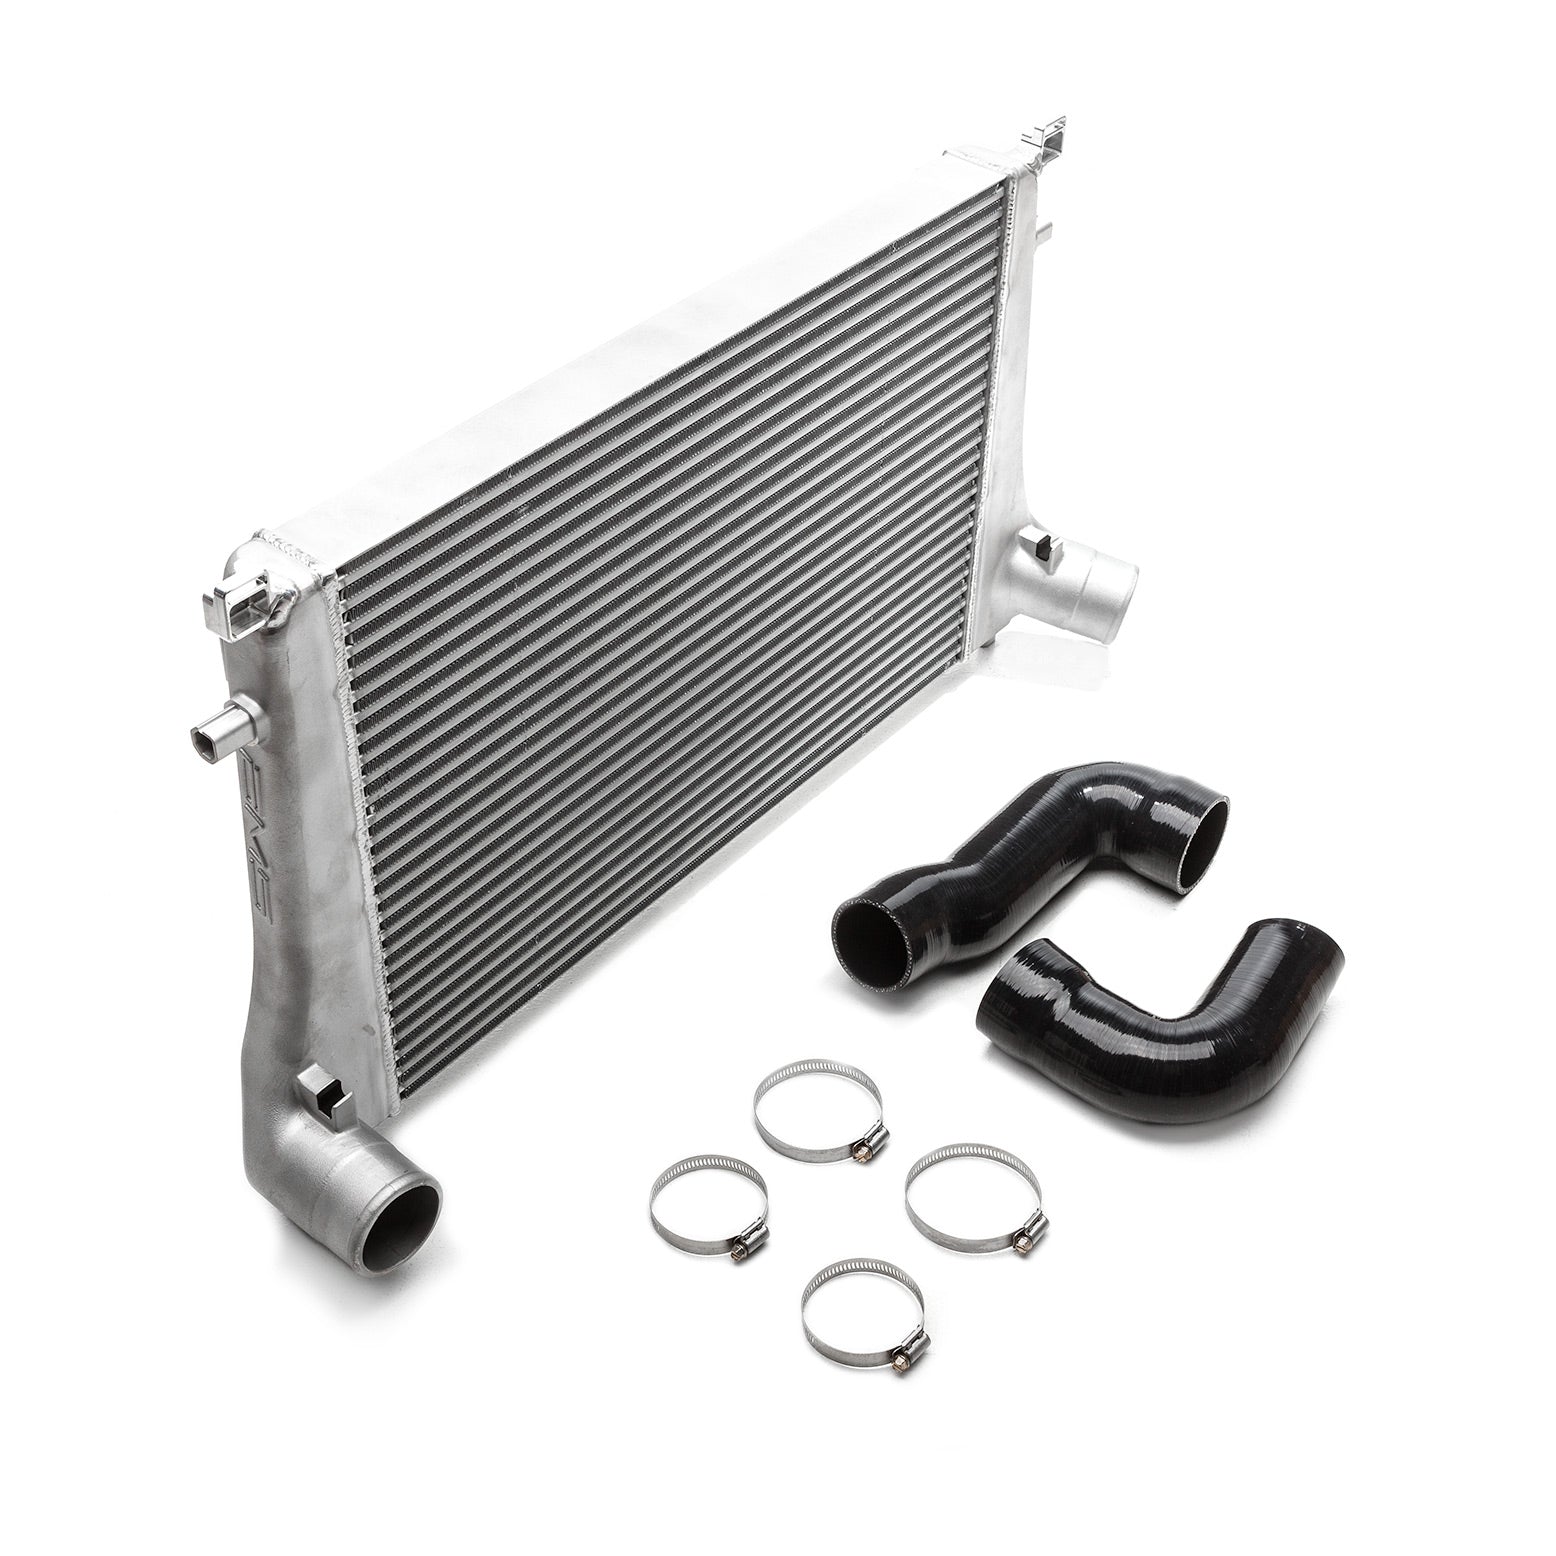 COBB VLK0030020-A AUDI Stage 2 Power Package S3 (8V) Photo-1 